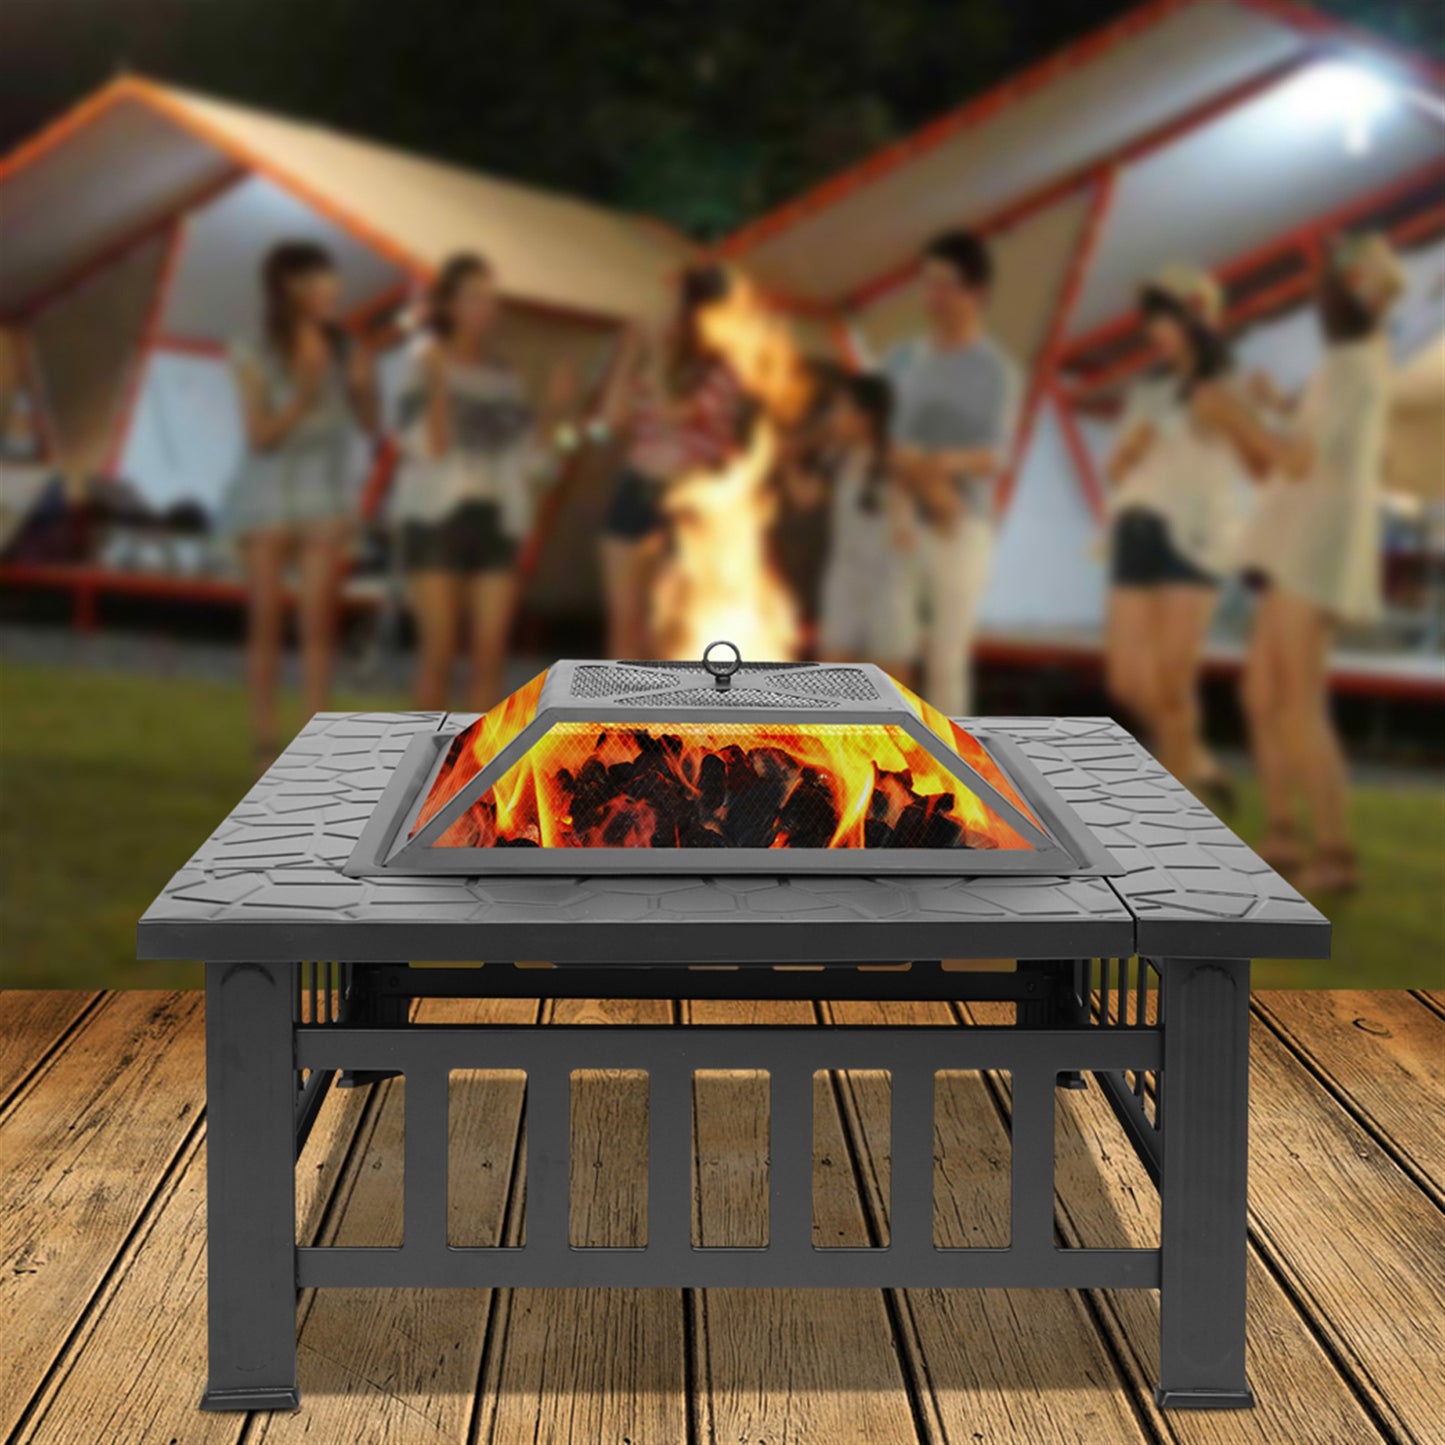 32 Inch Square Metal Fire Pit, Outdoor Wood Burning Bonfire Stove with Mesh Lid, Grate, BBQ Grill and Poker, Portable Charcoal Grill Fire Stove for Camping, Picnic, Party, Backyard, C12